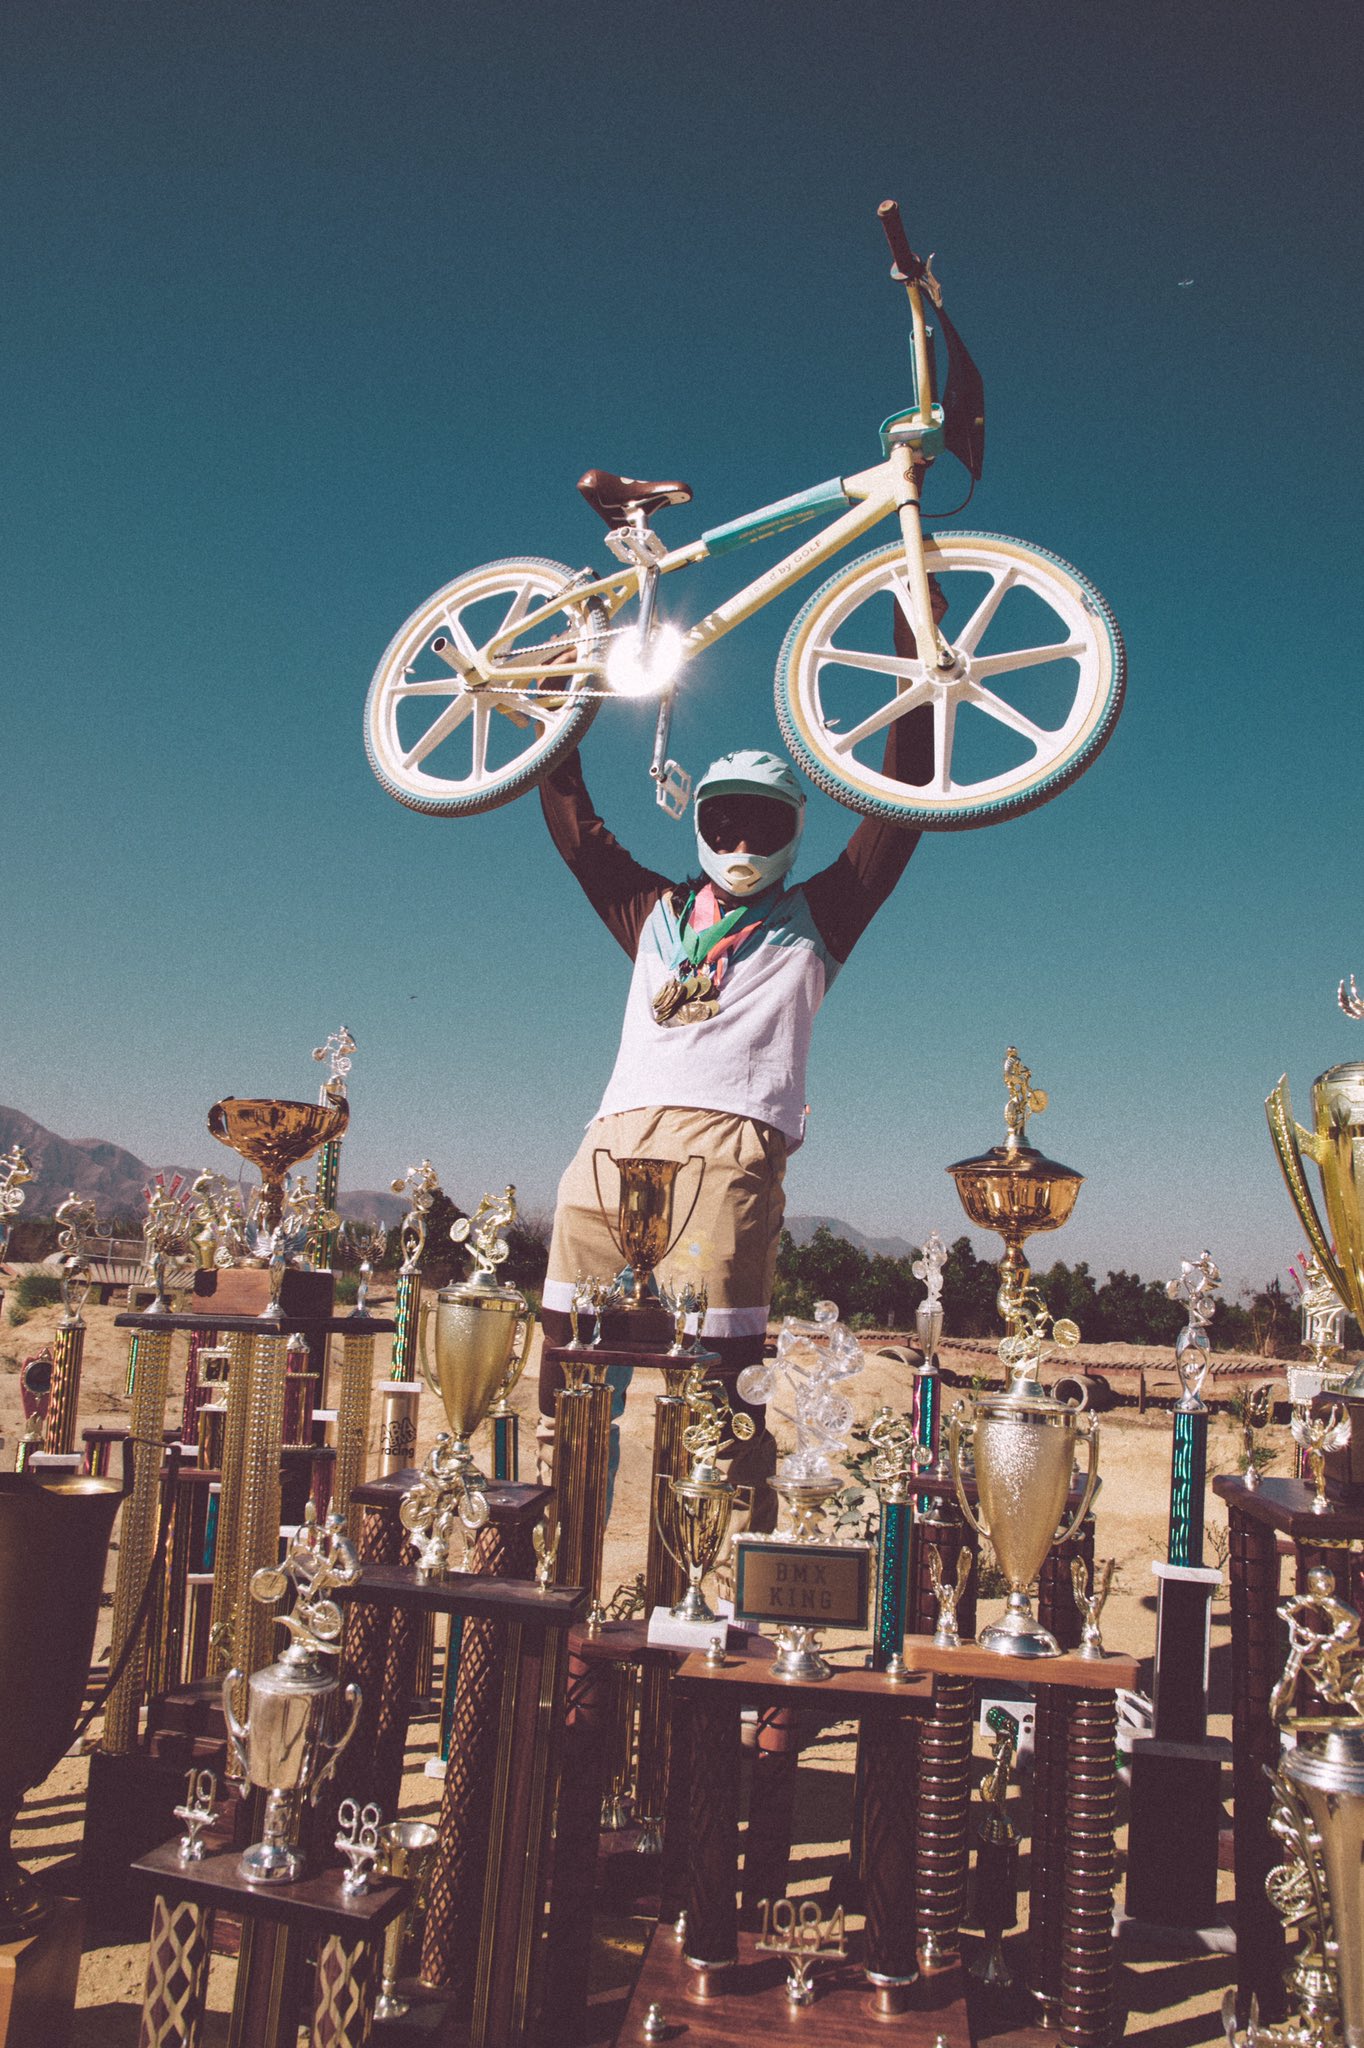 Tyler the Creator 'Surfs' on His Bike in L.A.